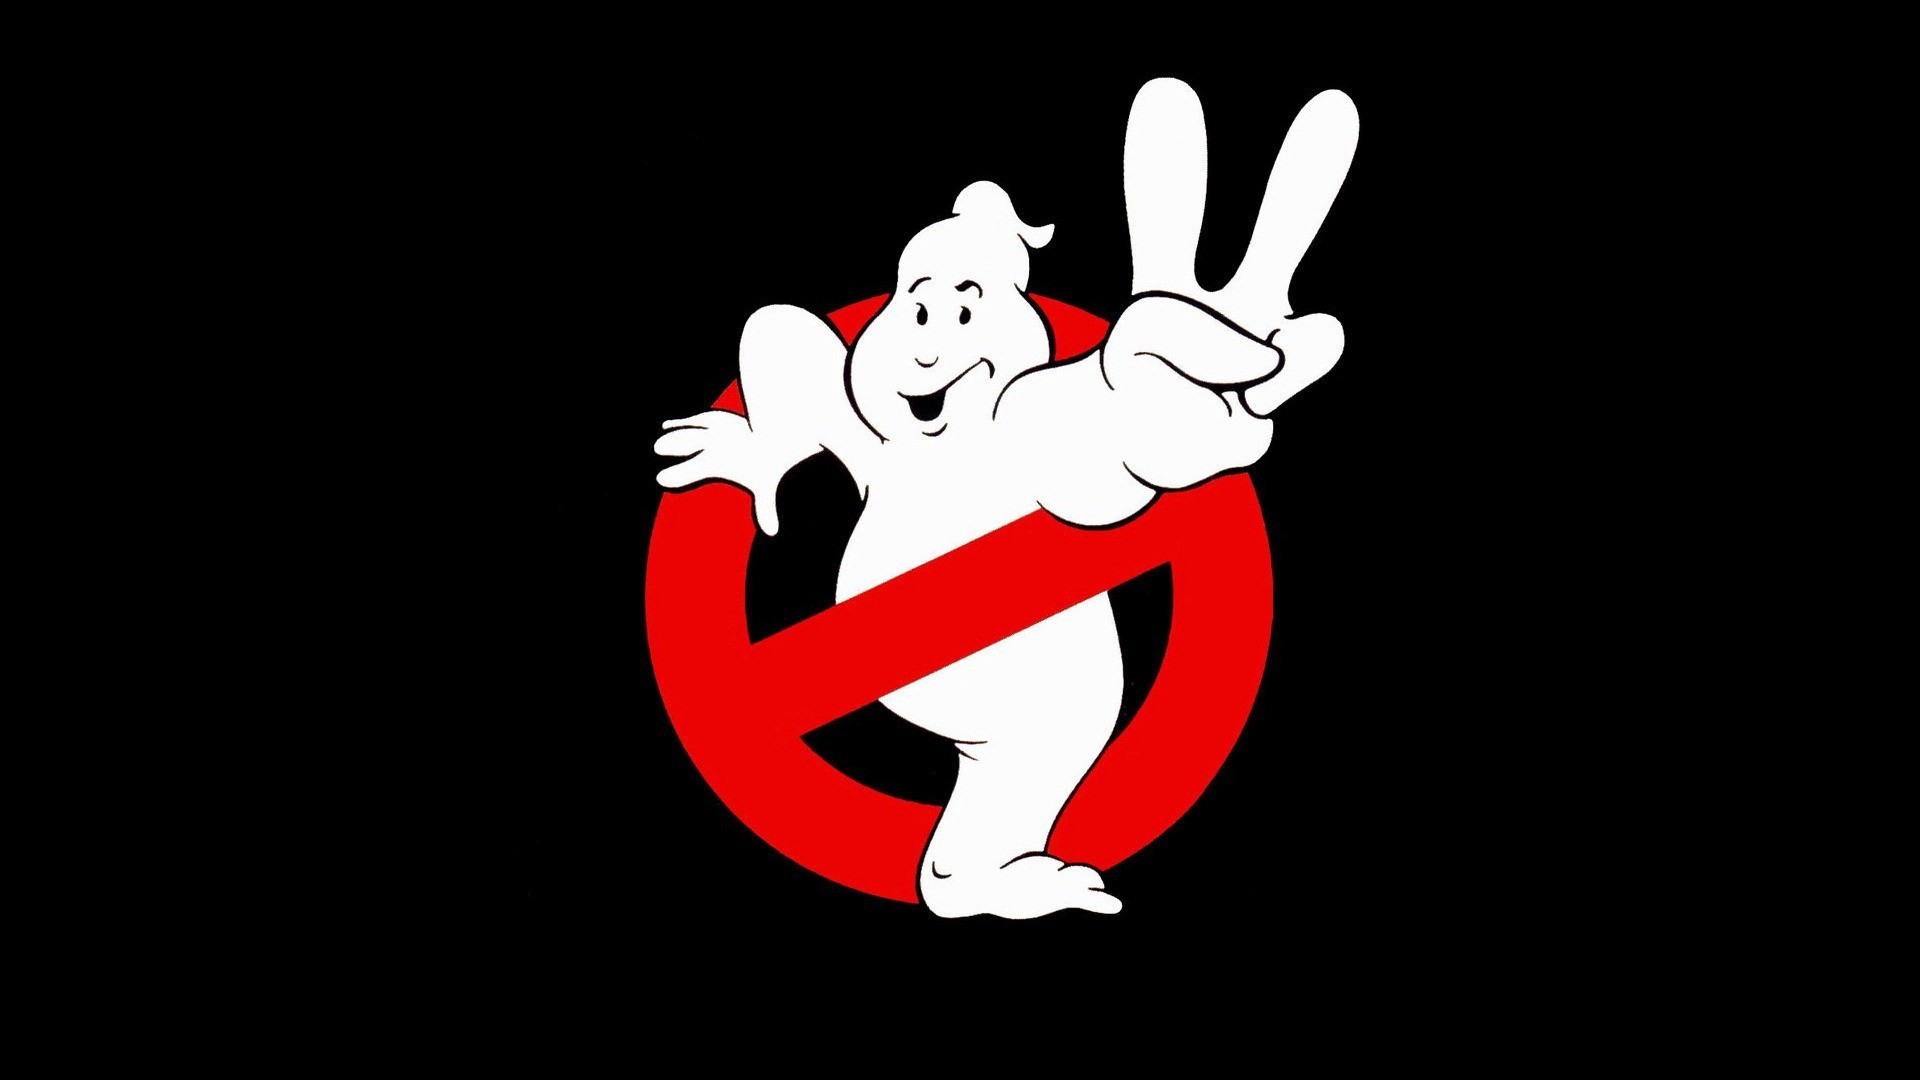 Ghostbusters 2018 Wallpapers (82+ images)1920 x 1080